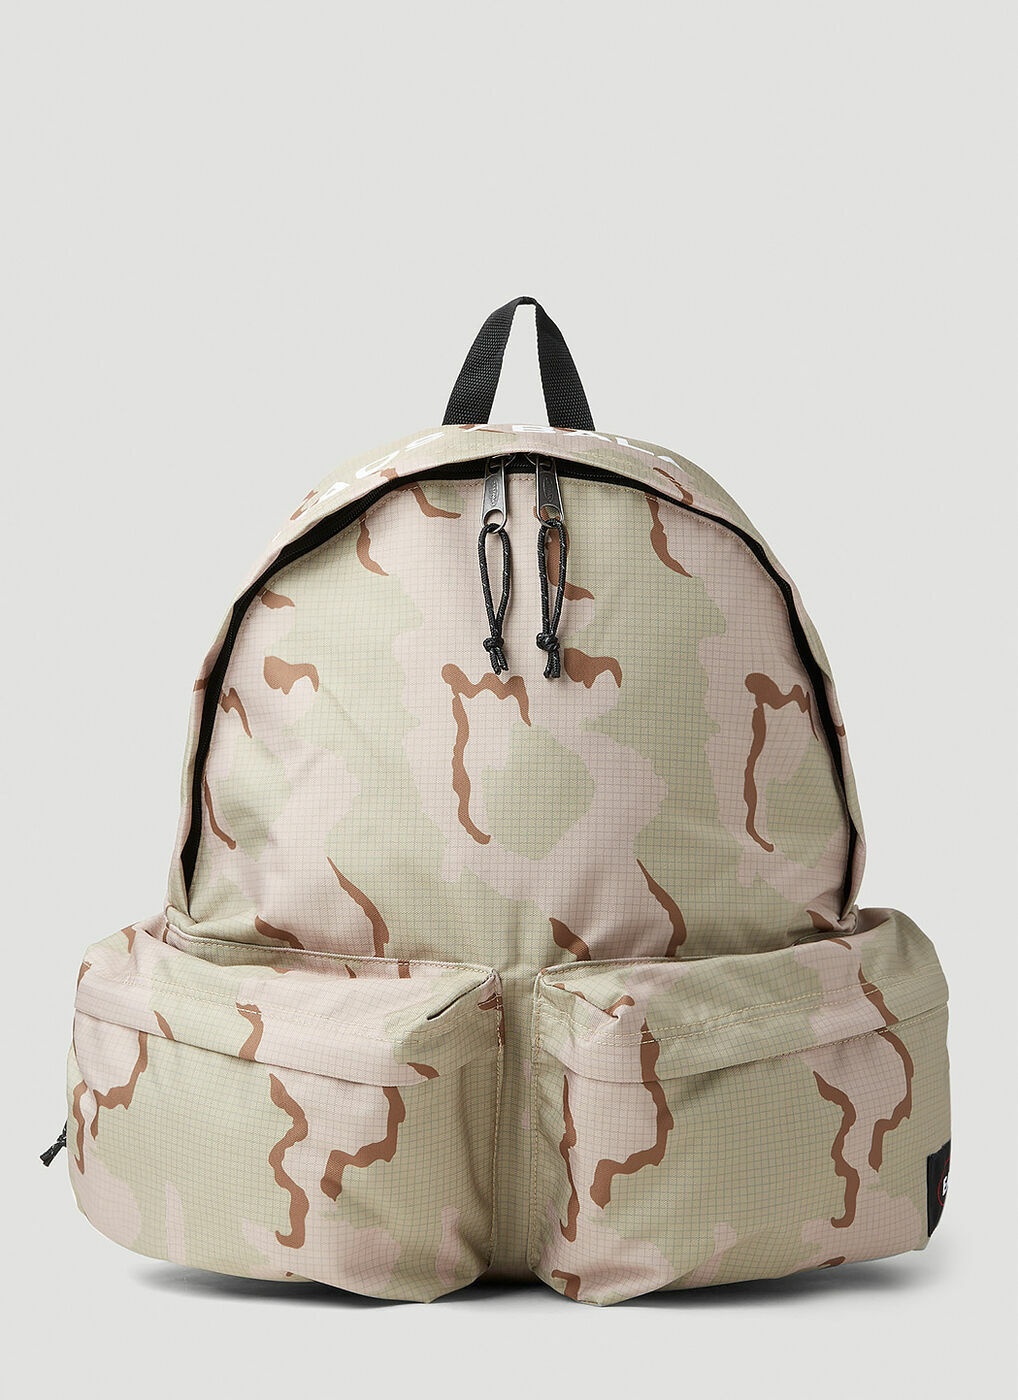 + Eastpak Chaos Balance Camouflage-Print Ripstop Backpack